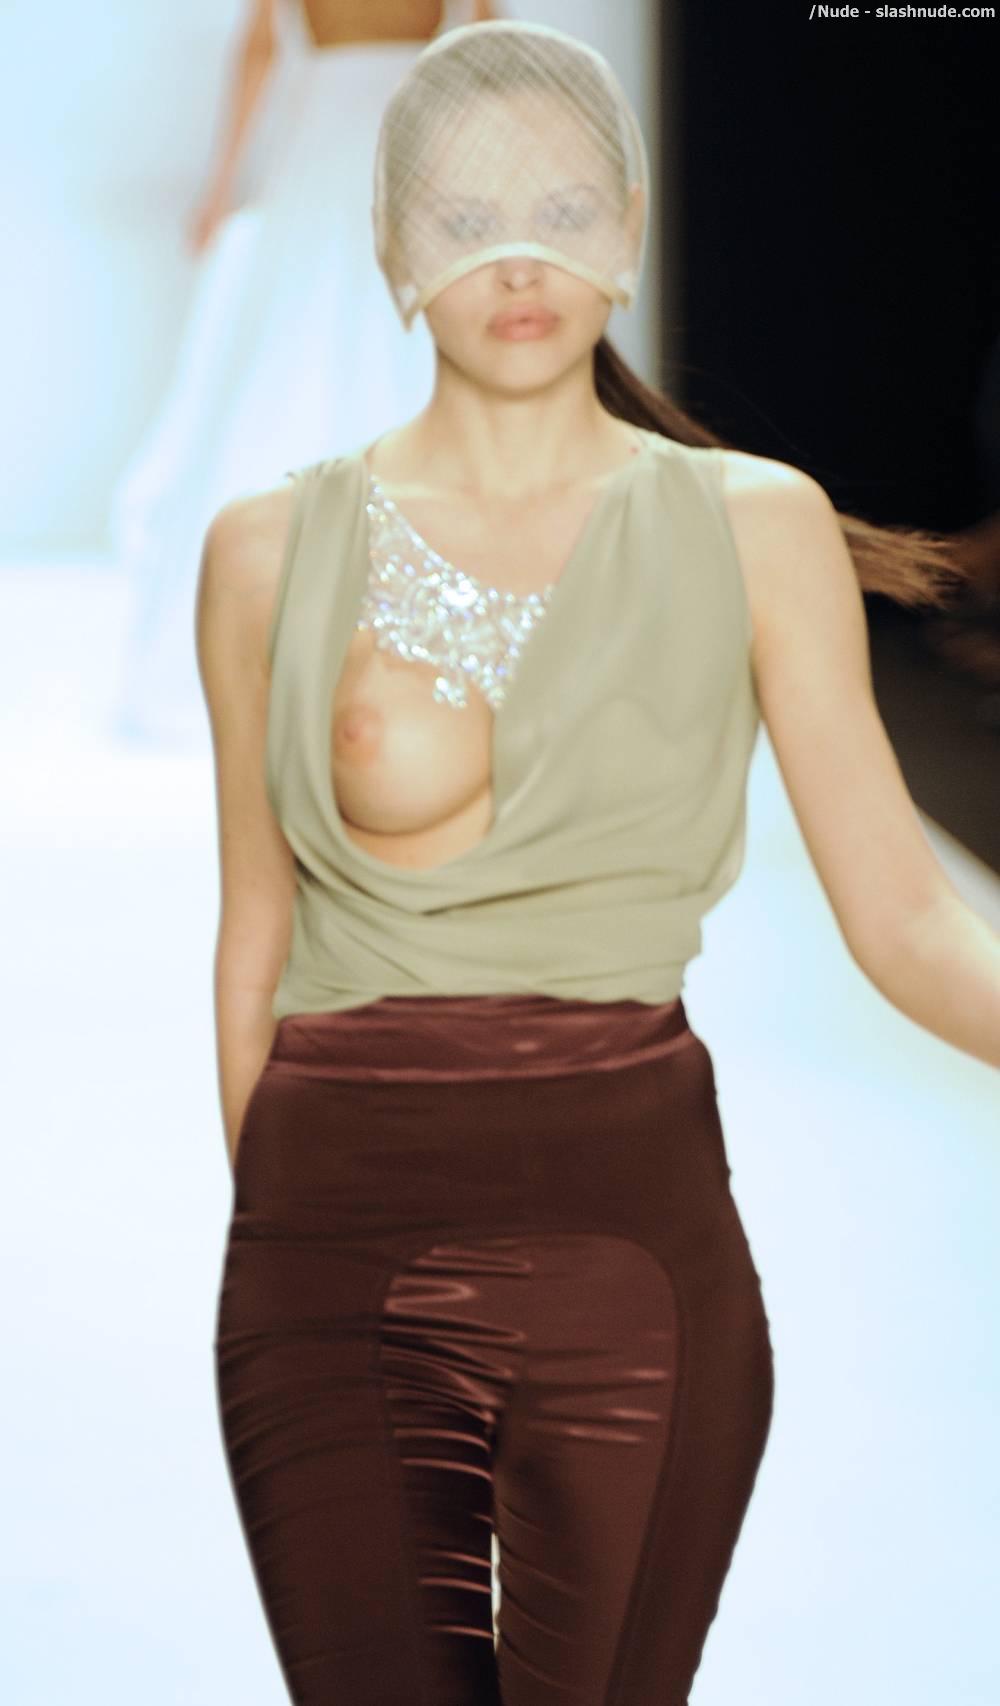 Hana Nitsche Breast Slips Out Of Her Top On Runway 6